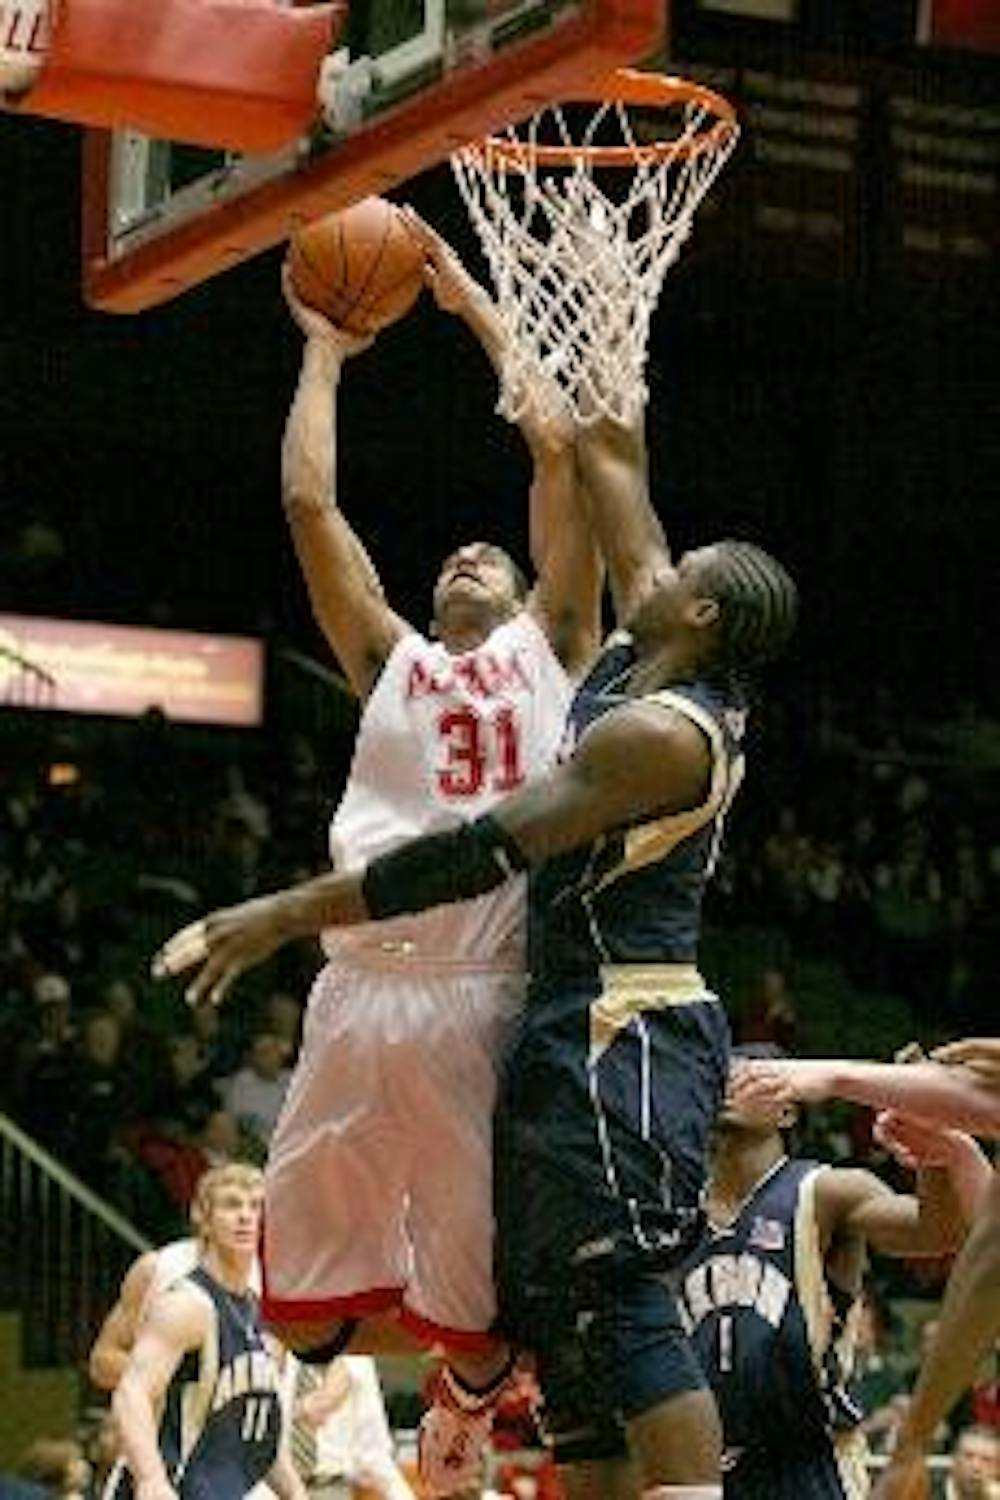 Miami's Nathan Peavy goes up for two of his 14 points against Akron's Jeremiah Wood Wednesday night at Millett Hall.